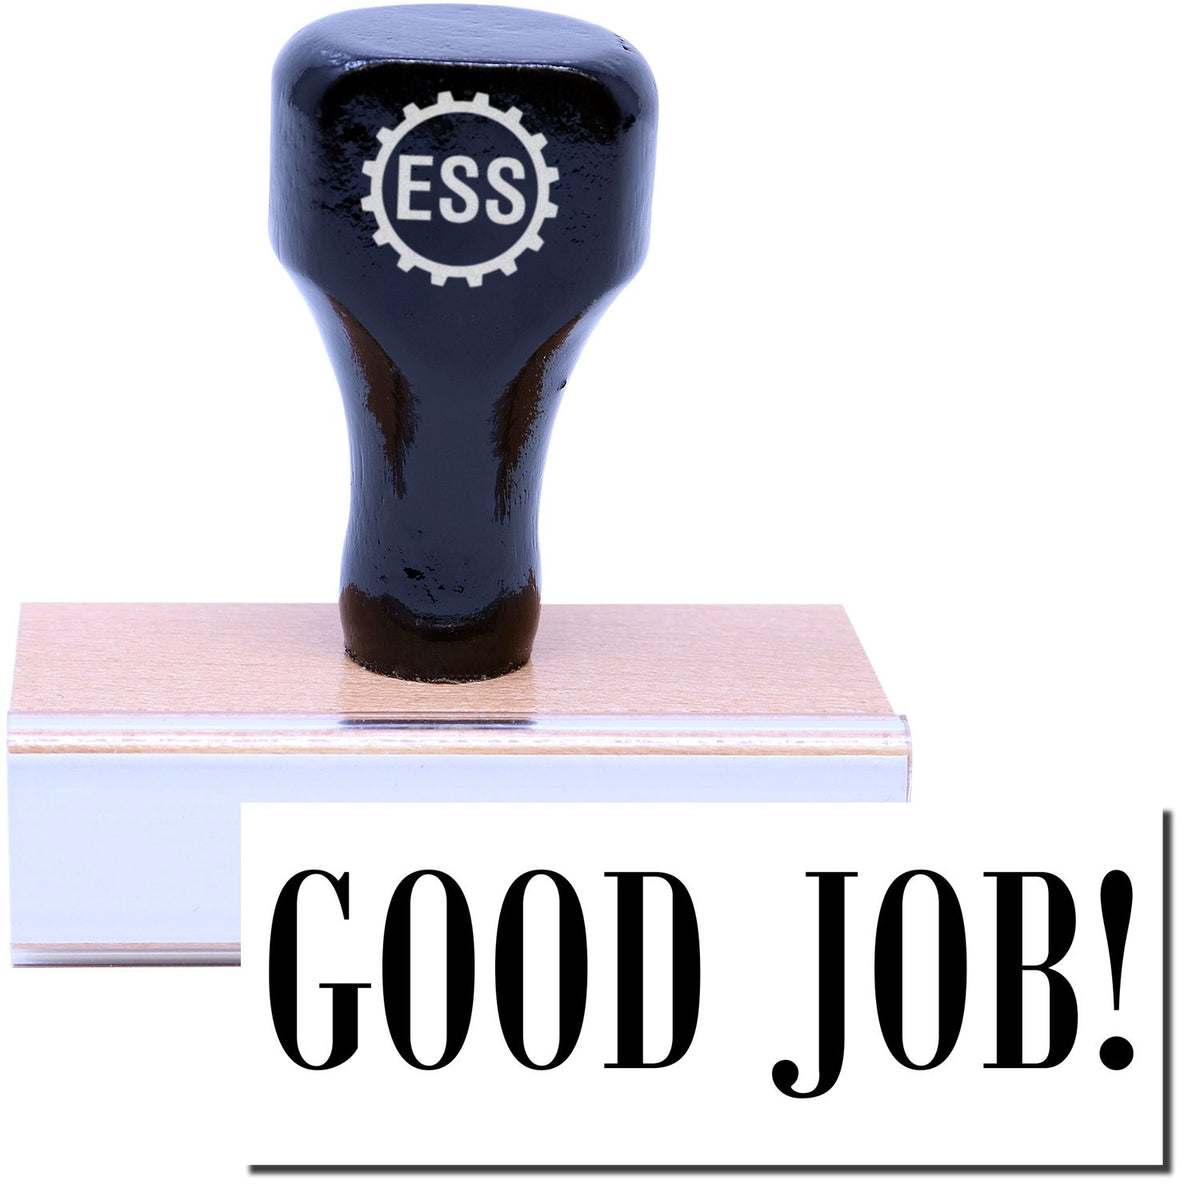 A stock office rubber stamp with a stamped image showing how the text &quot;GOOD JOB!&quot; in a large font is displayed after stamping.